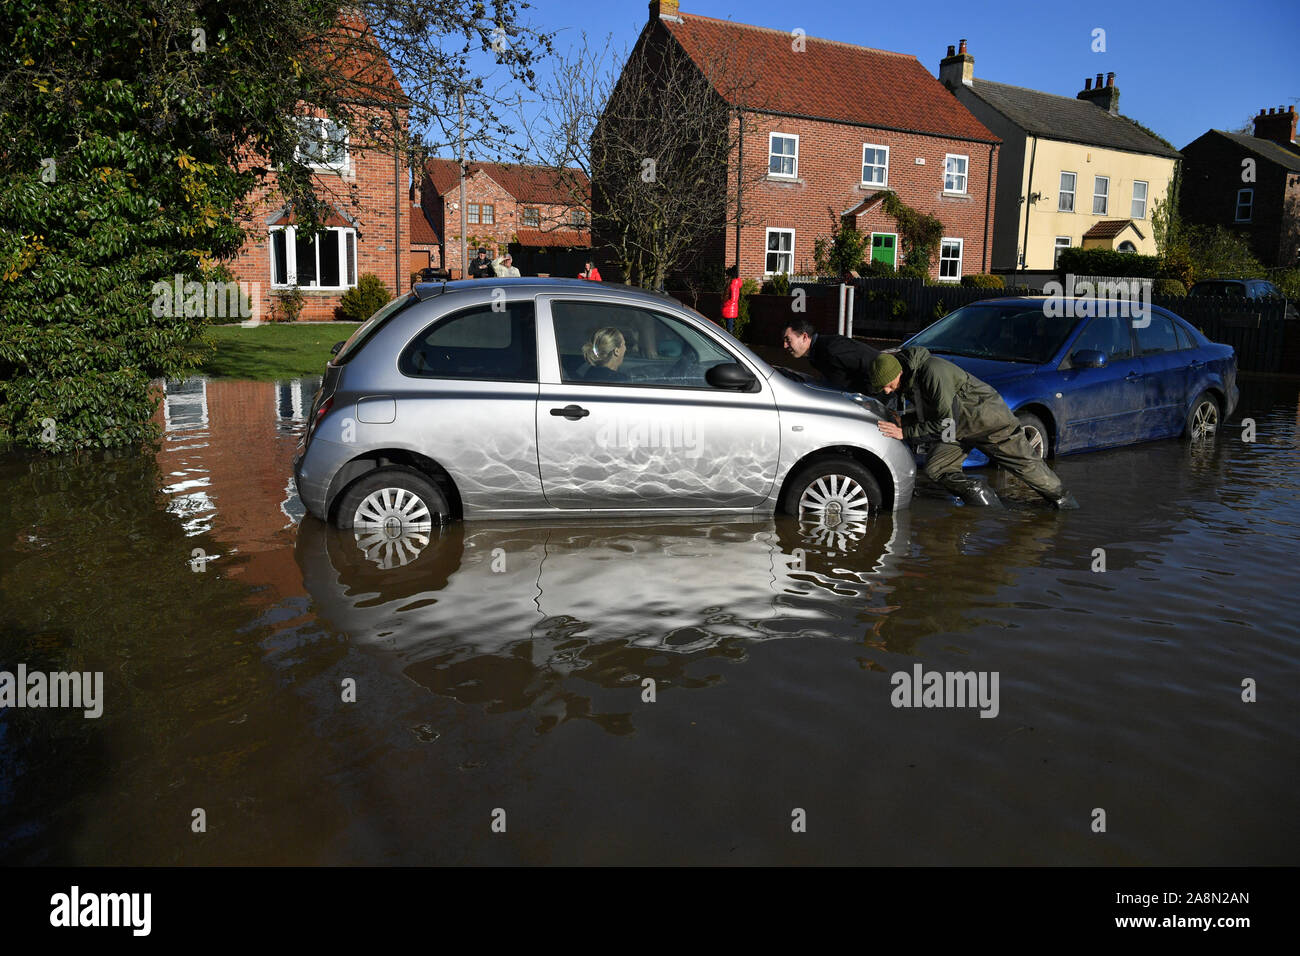 Residents attempt to push a stranded car out of floodwater in Fishlake, Doncaster as parts of England endured a month's worth of rain in 24 hours, with scores of people rescued or forced to evacuate their homes. Stock Photo